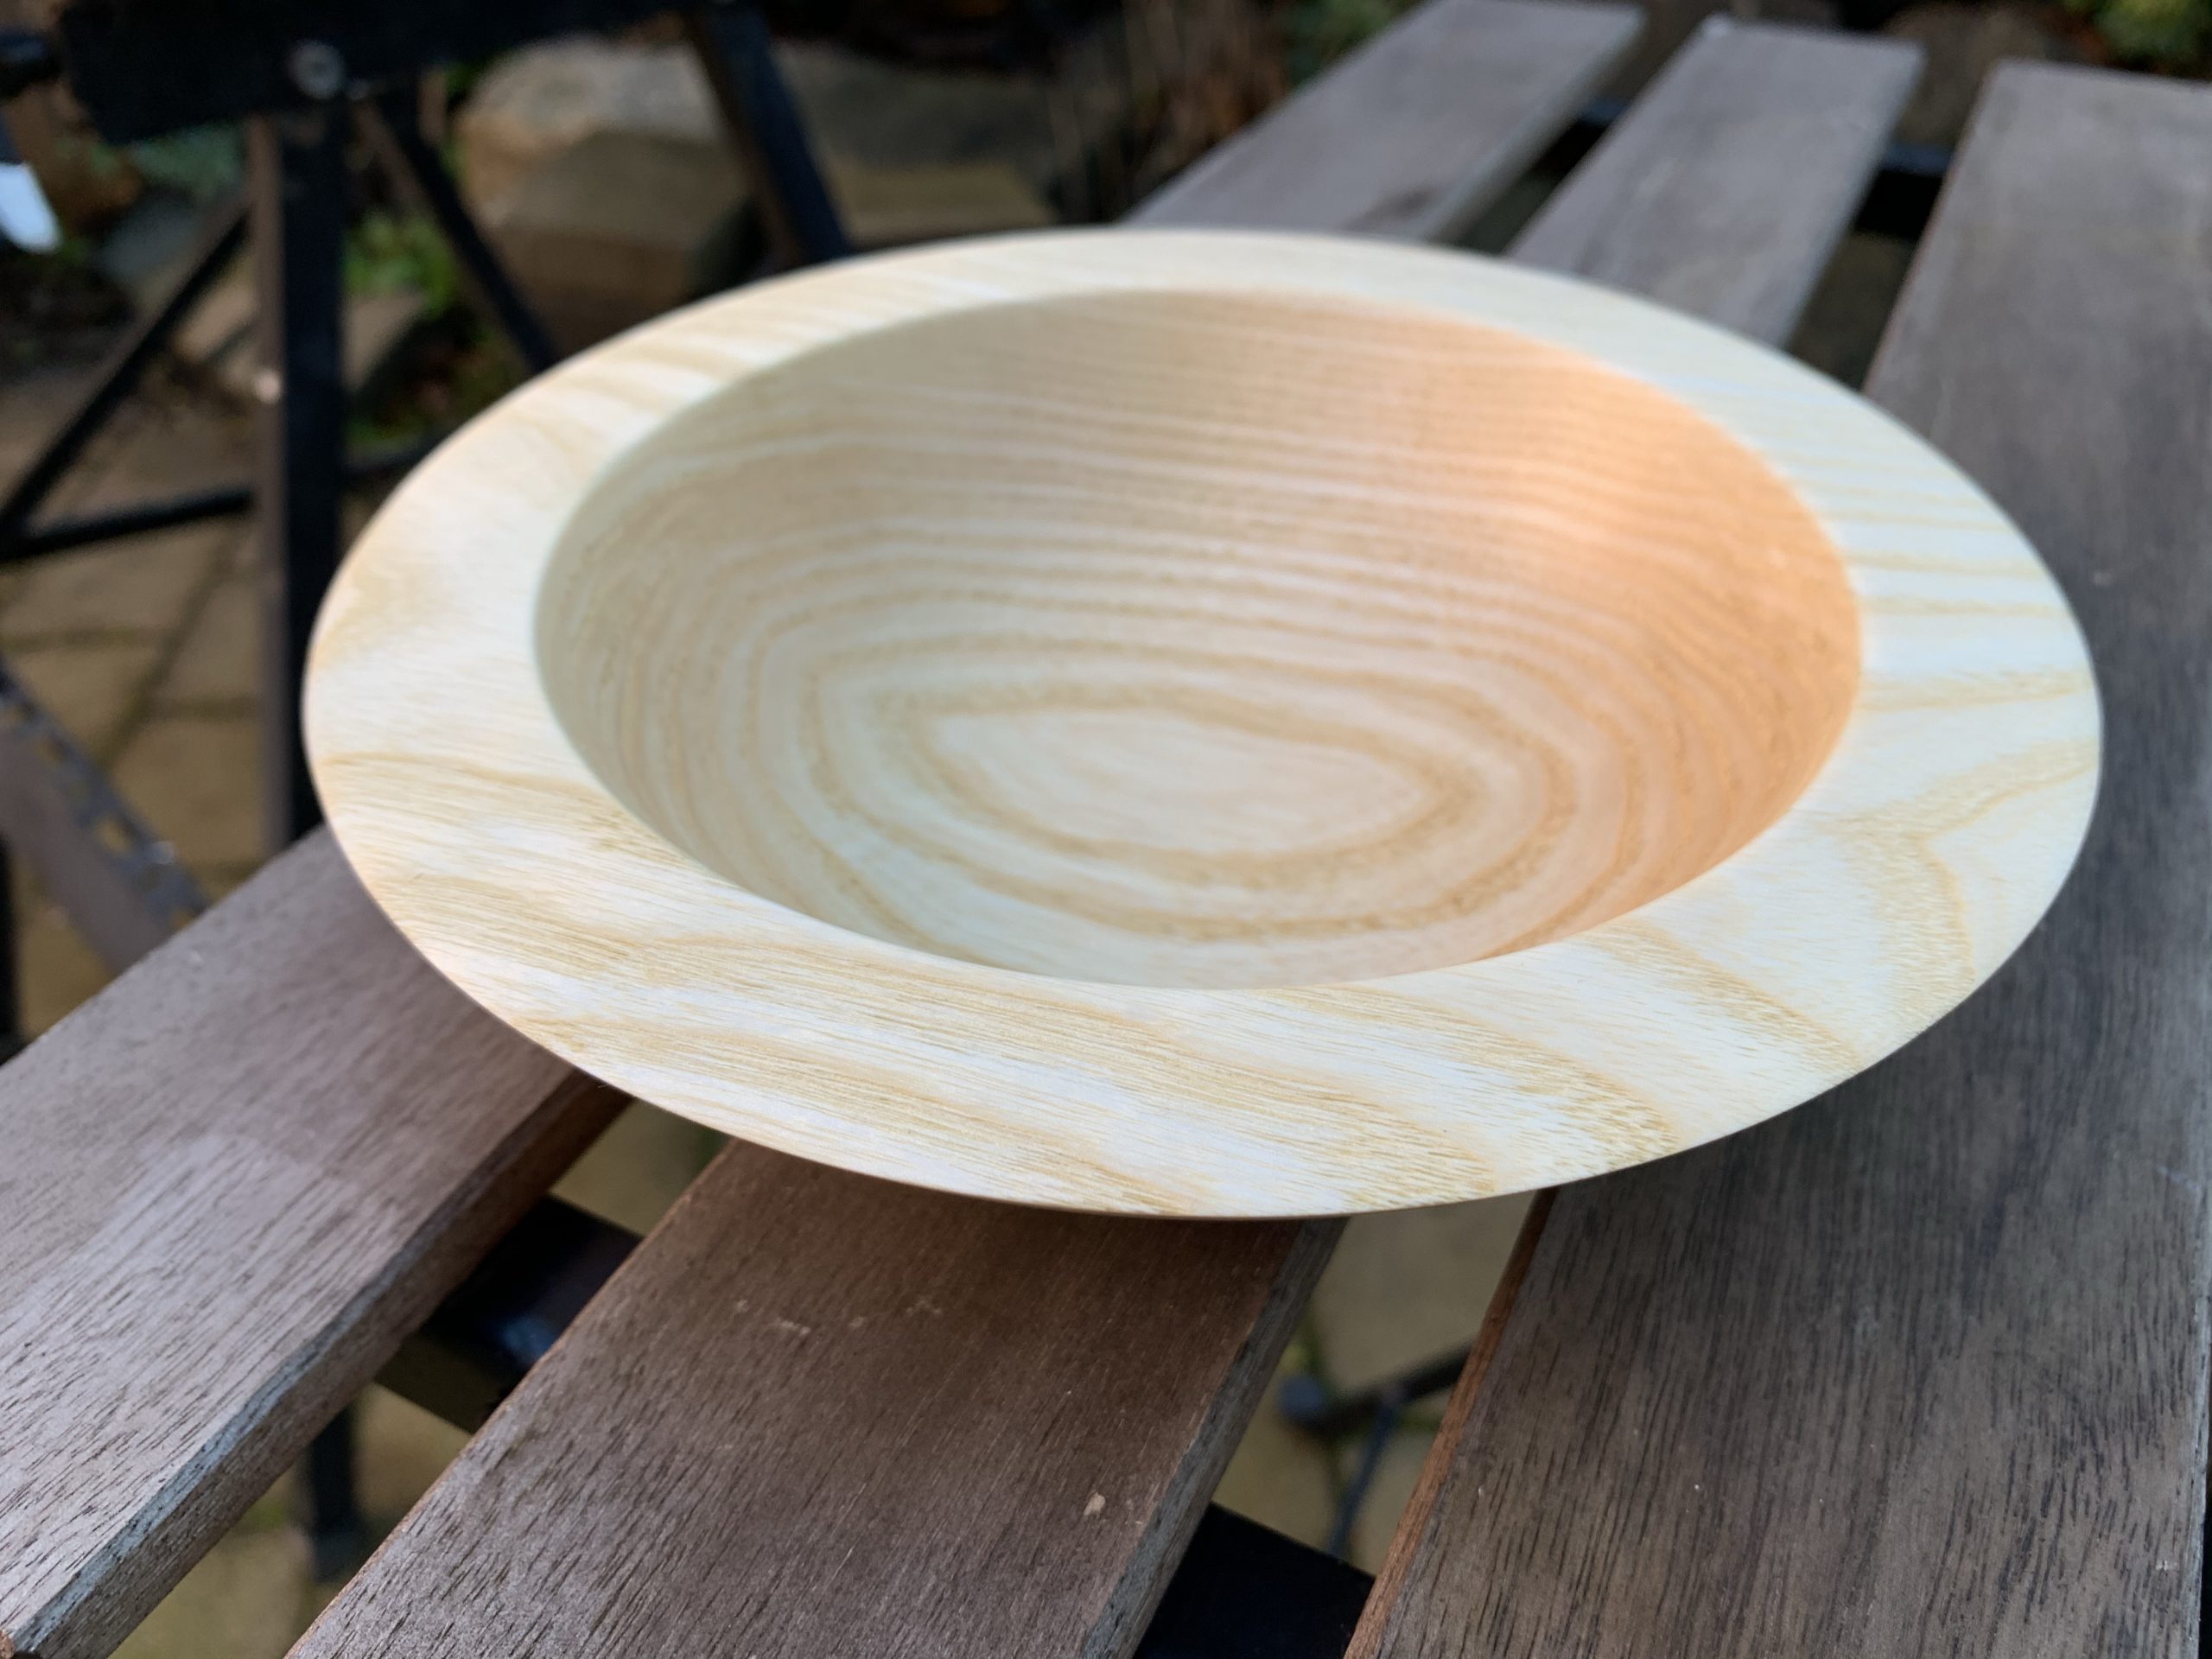 Turning my first bowl